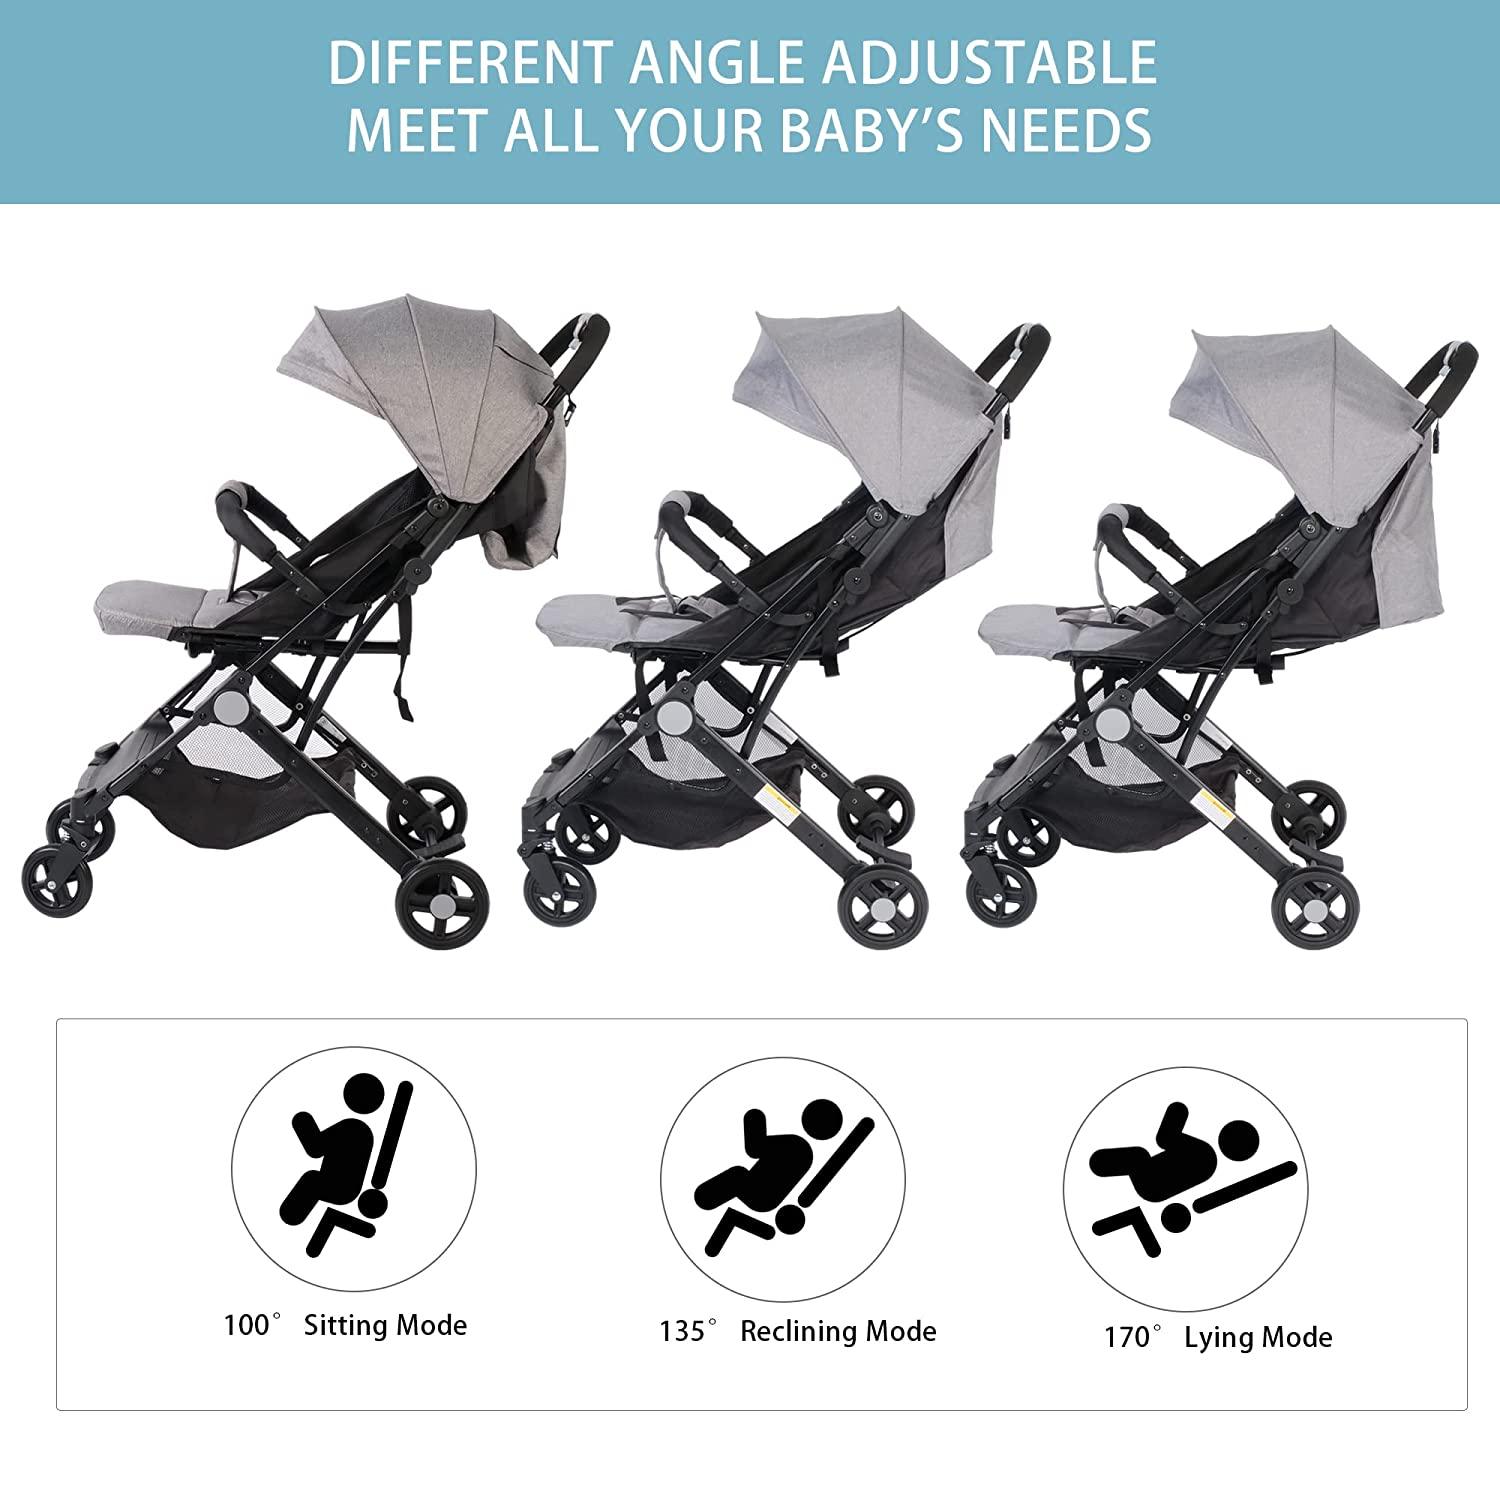 Foldable Compact Airplane Travel Strollers Lightweight Baby Stroller with One-Hand Fold Pushchair Adjustable Canopy and Backrest - Bosonshop